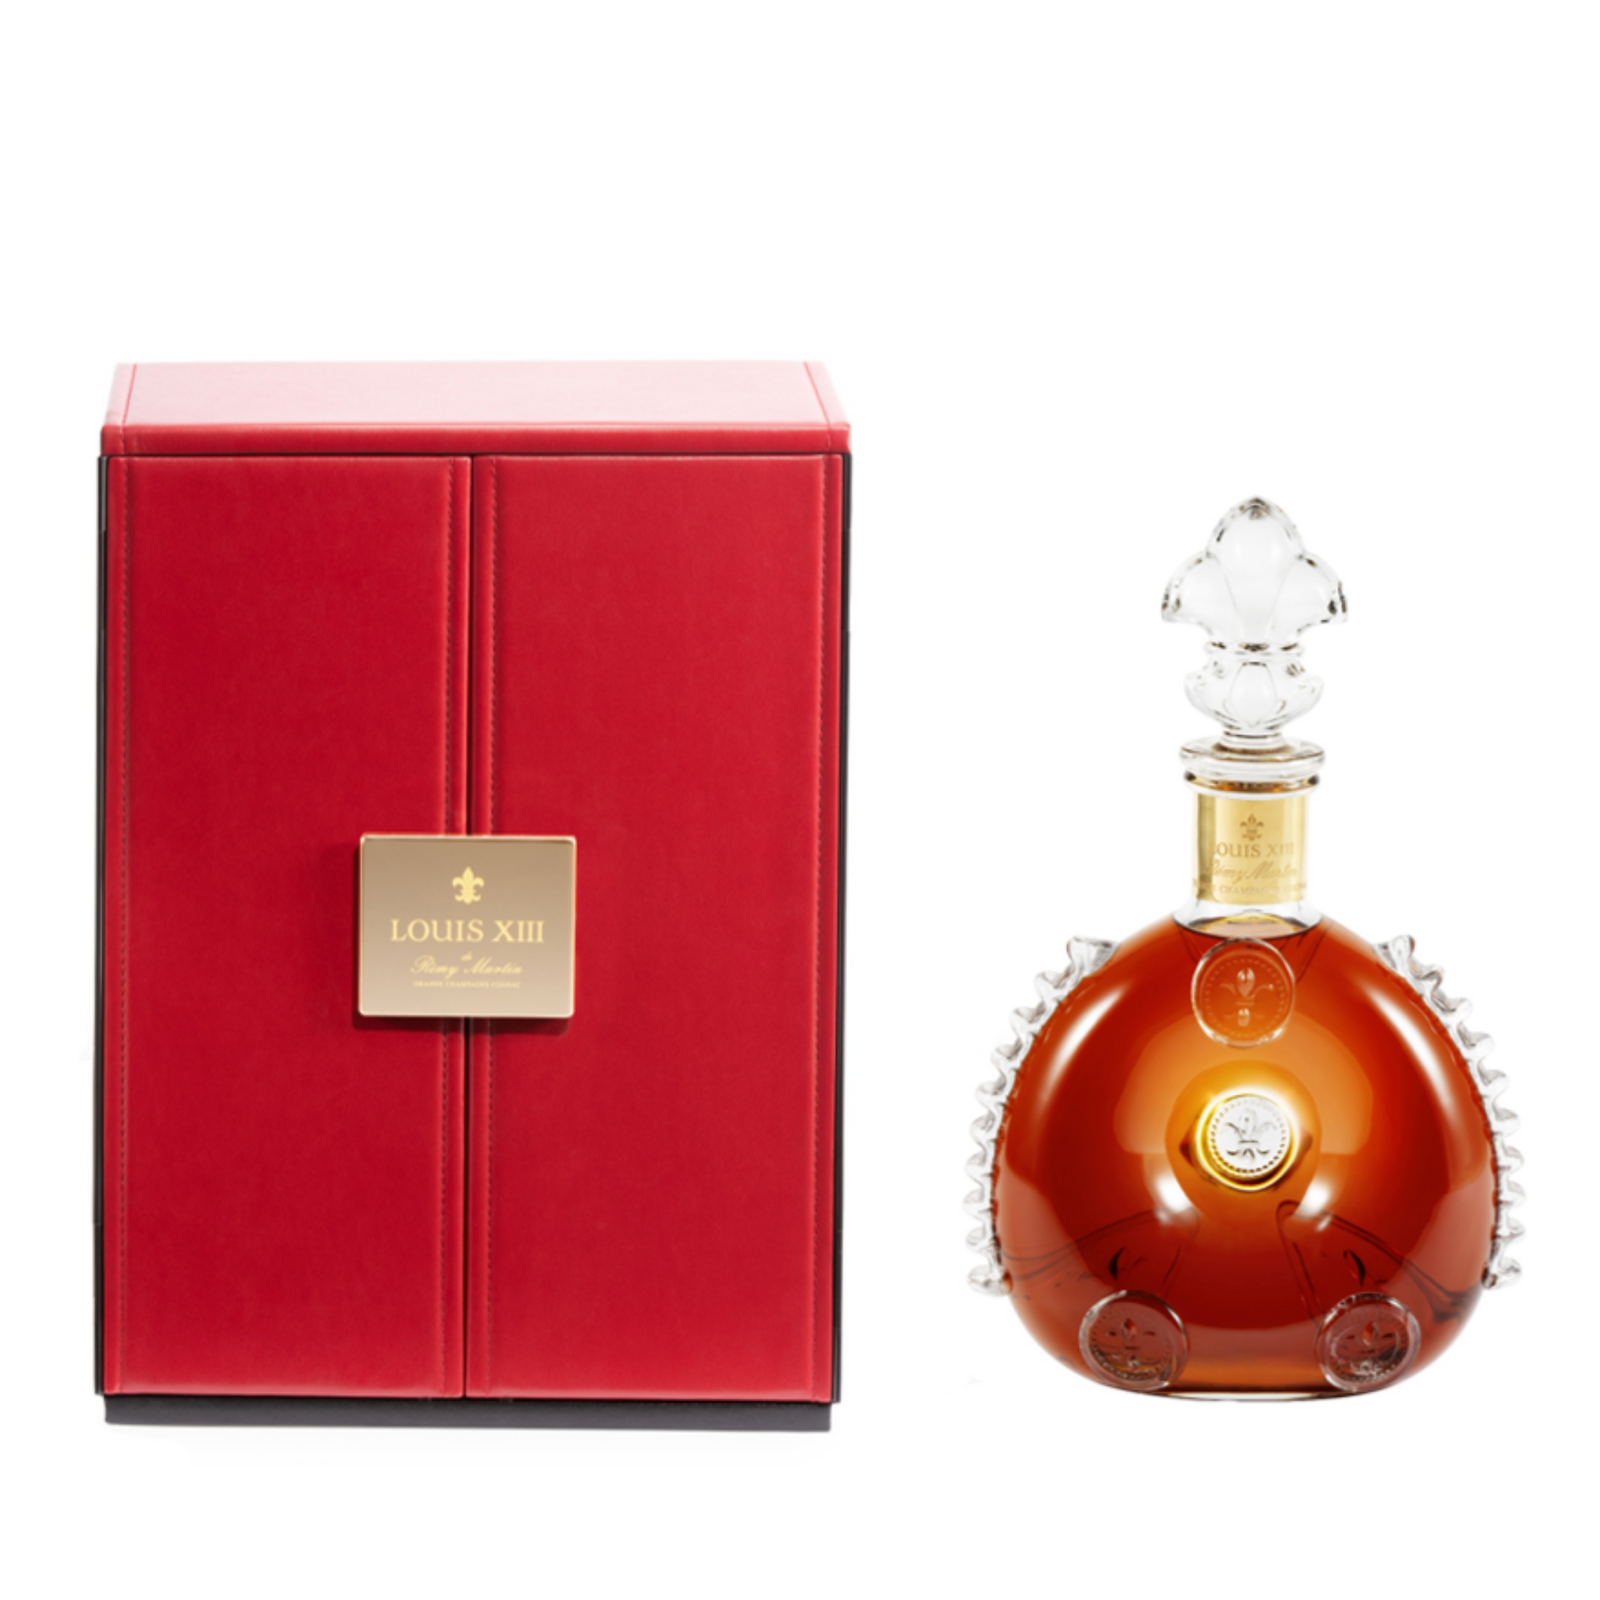 A packshot of LOUIS XIII Magnum decanter, close to a closed red packaging,  on a white background